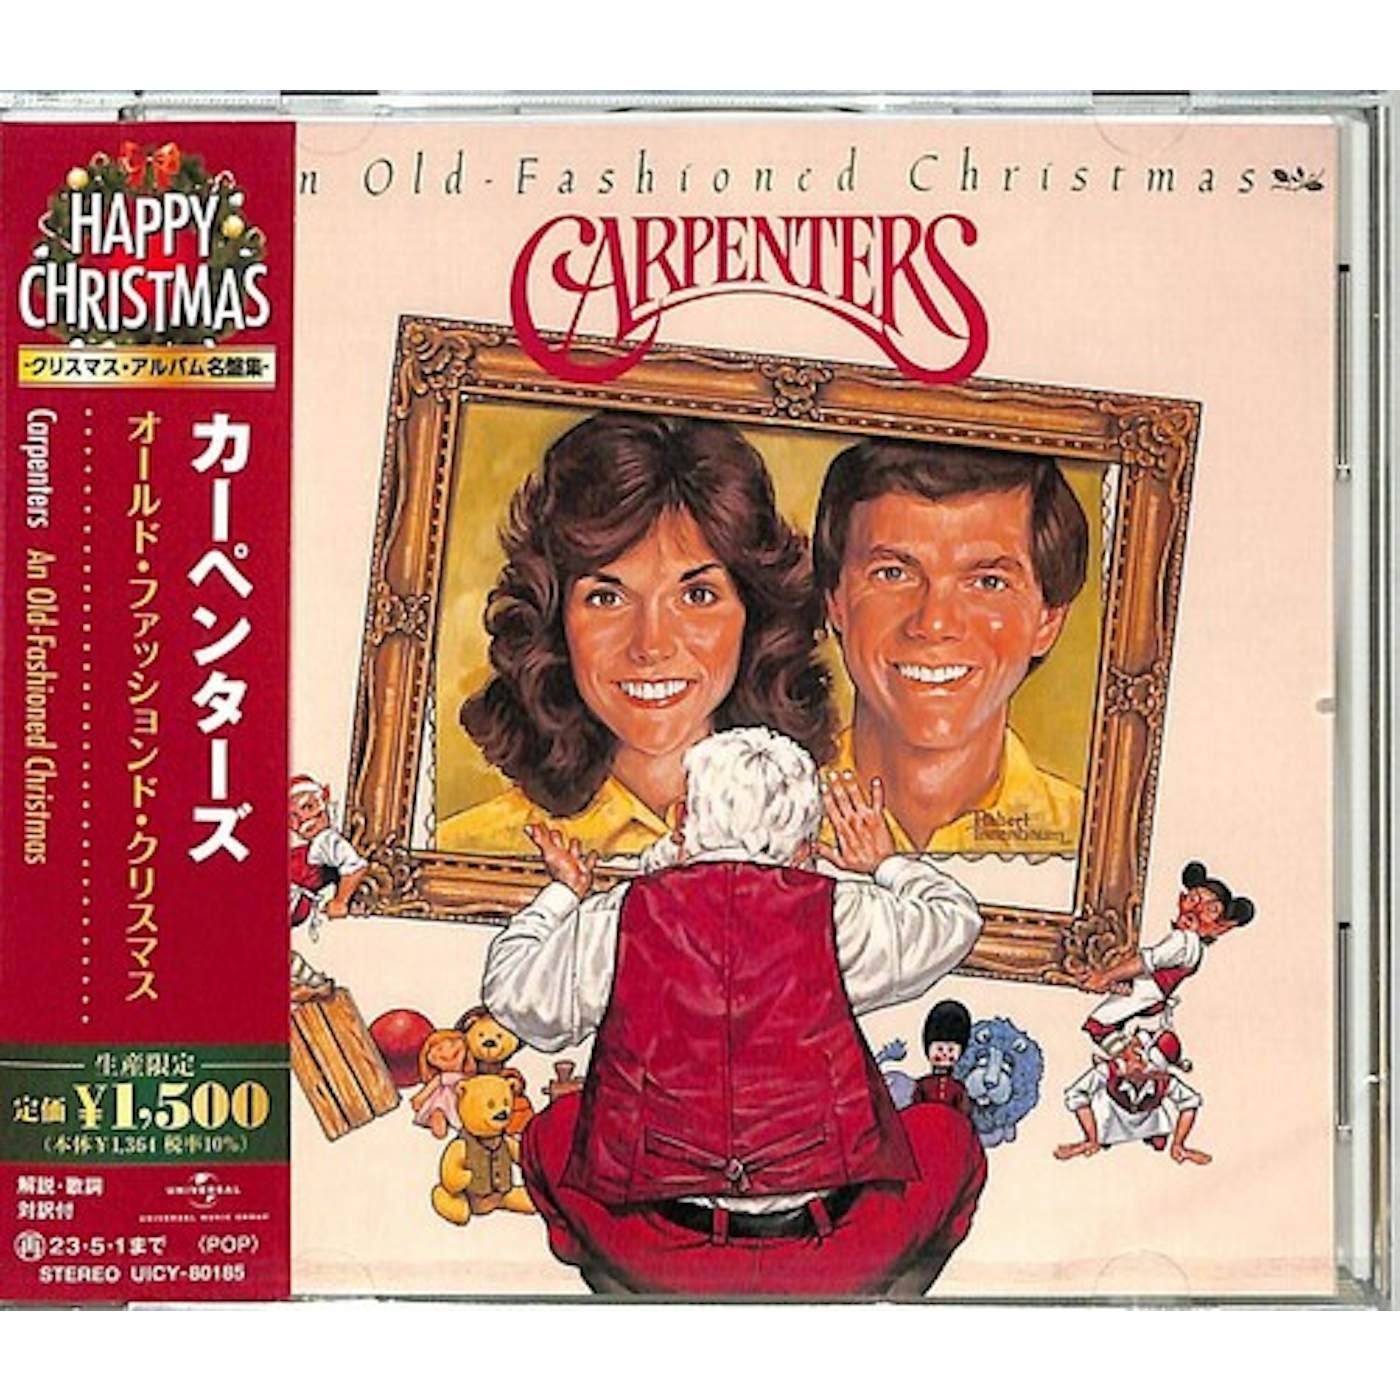 Carpenters OLD FASHIONED CHRISTMAS CD